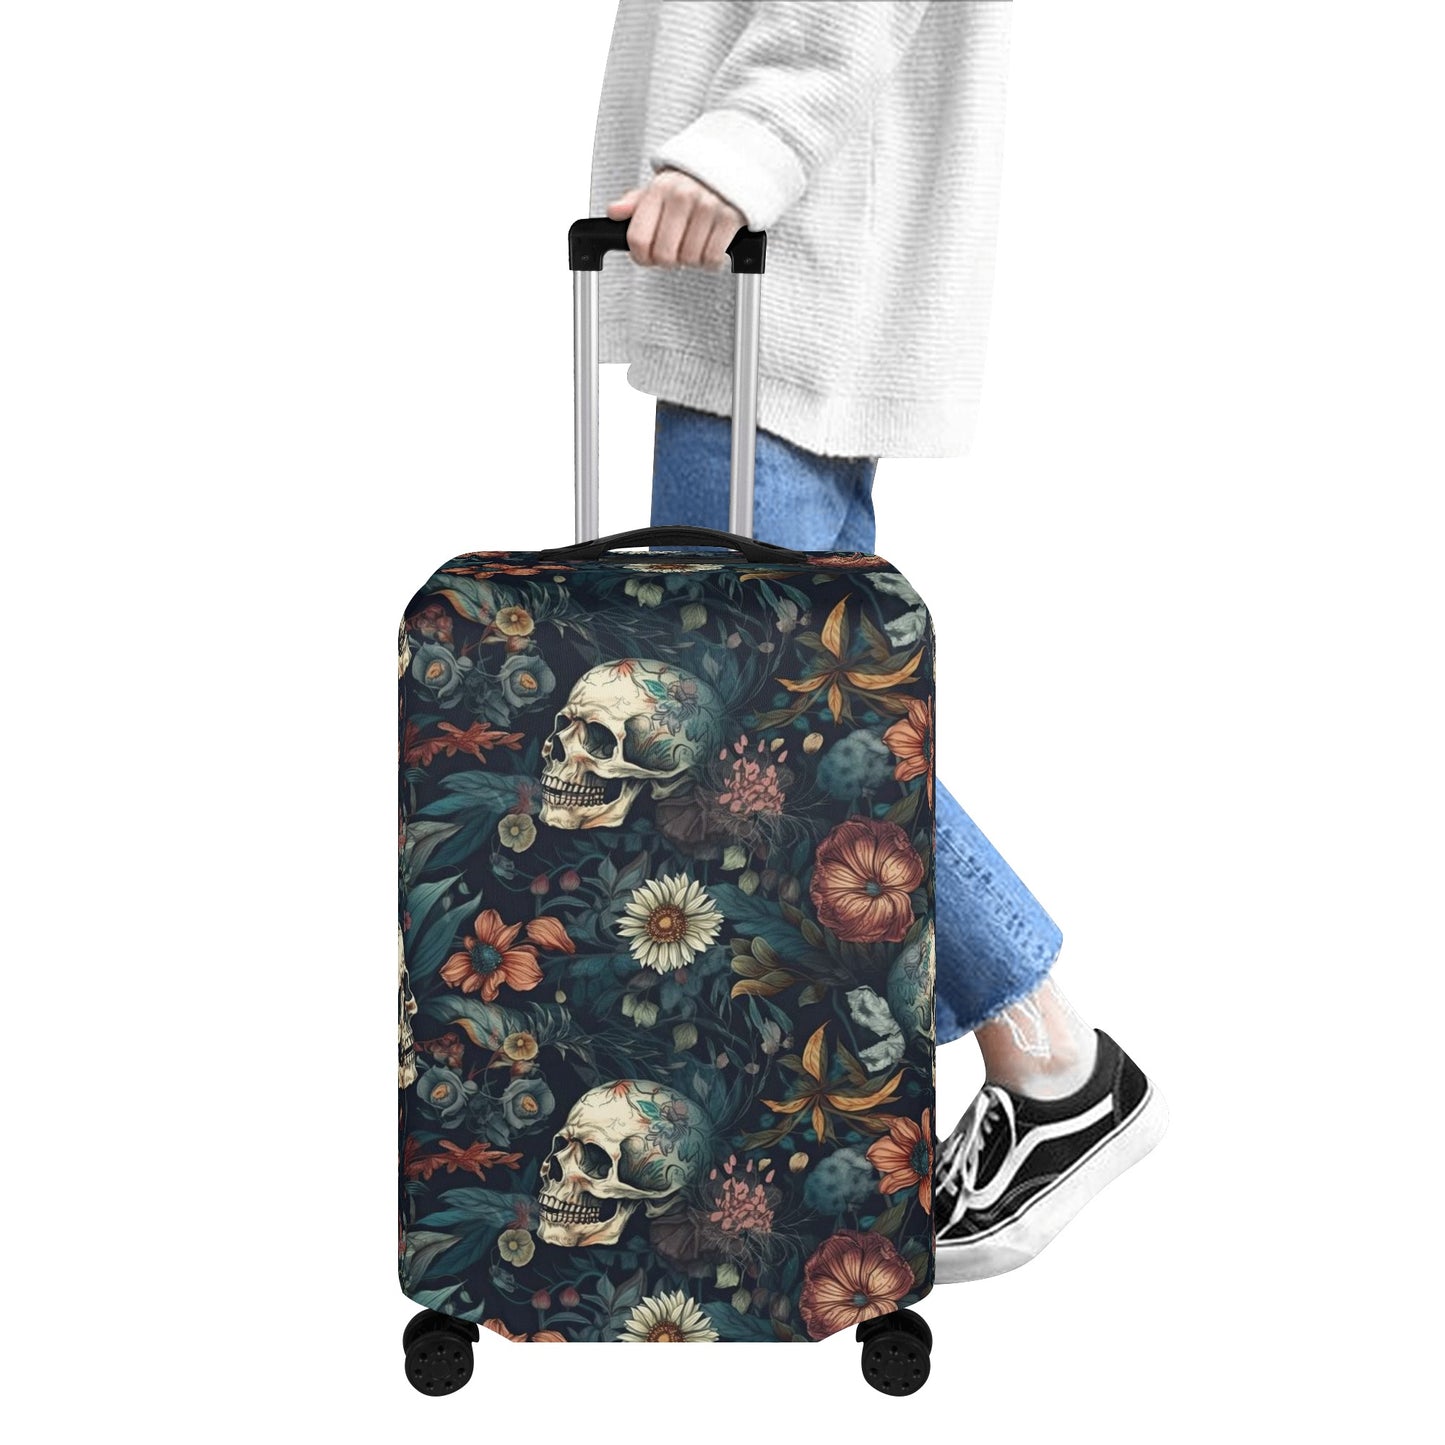 Goth suitcase tag, halloween suitcase tag, punisher skull suitcase cover, grim reaper luggage, rose skull suitcase tag, biker skull luggage